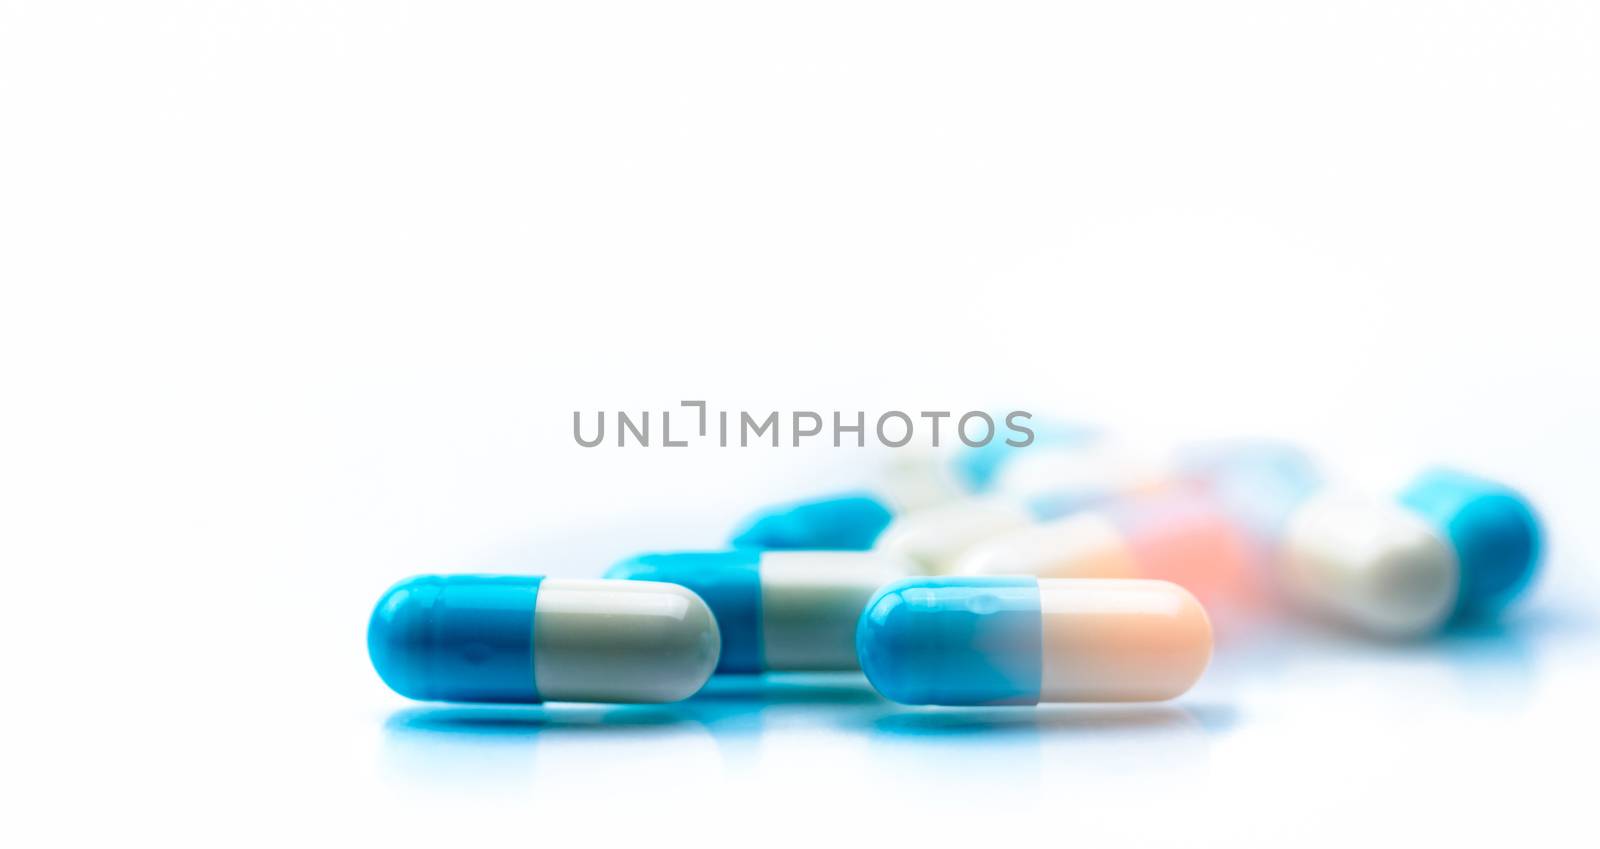 Selective focus on blue and white capsules pill spread on white background with shadow. Global healthcare concept. Antibiotics drug resistance. Antimicrobial capsule pills. Pharmaceutical industry.